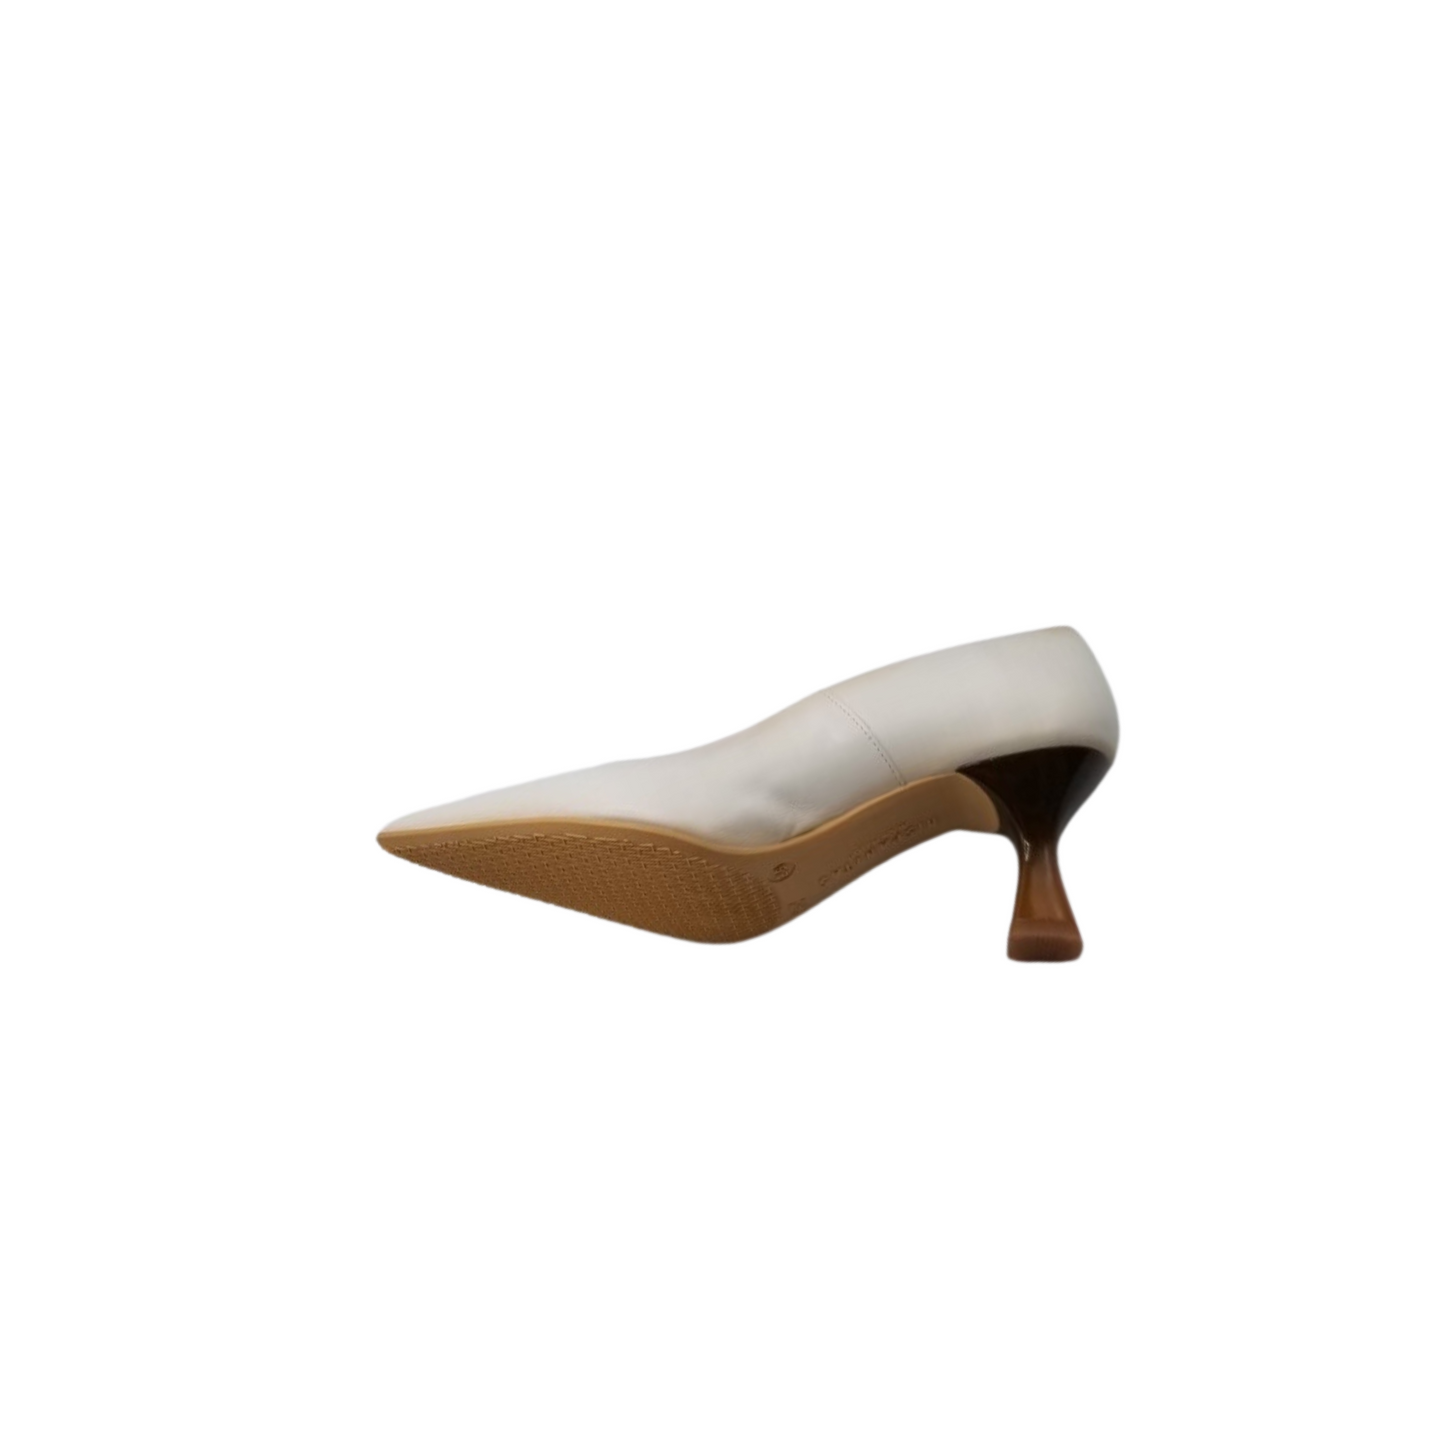 Interior view of right shoe and sole.  Very simple, classic pump.  The wow factor is inthe heel.  Hourglass shape and a darker shade then the upper which makes it stand out.